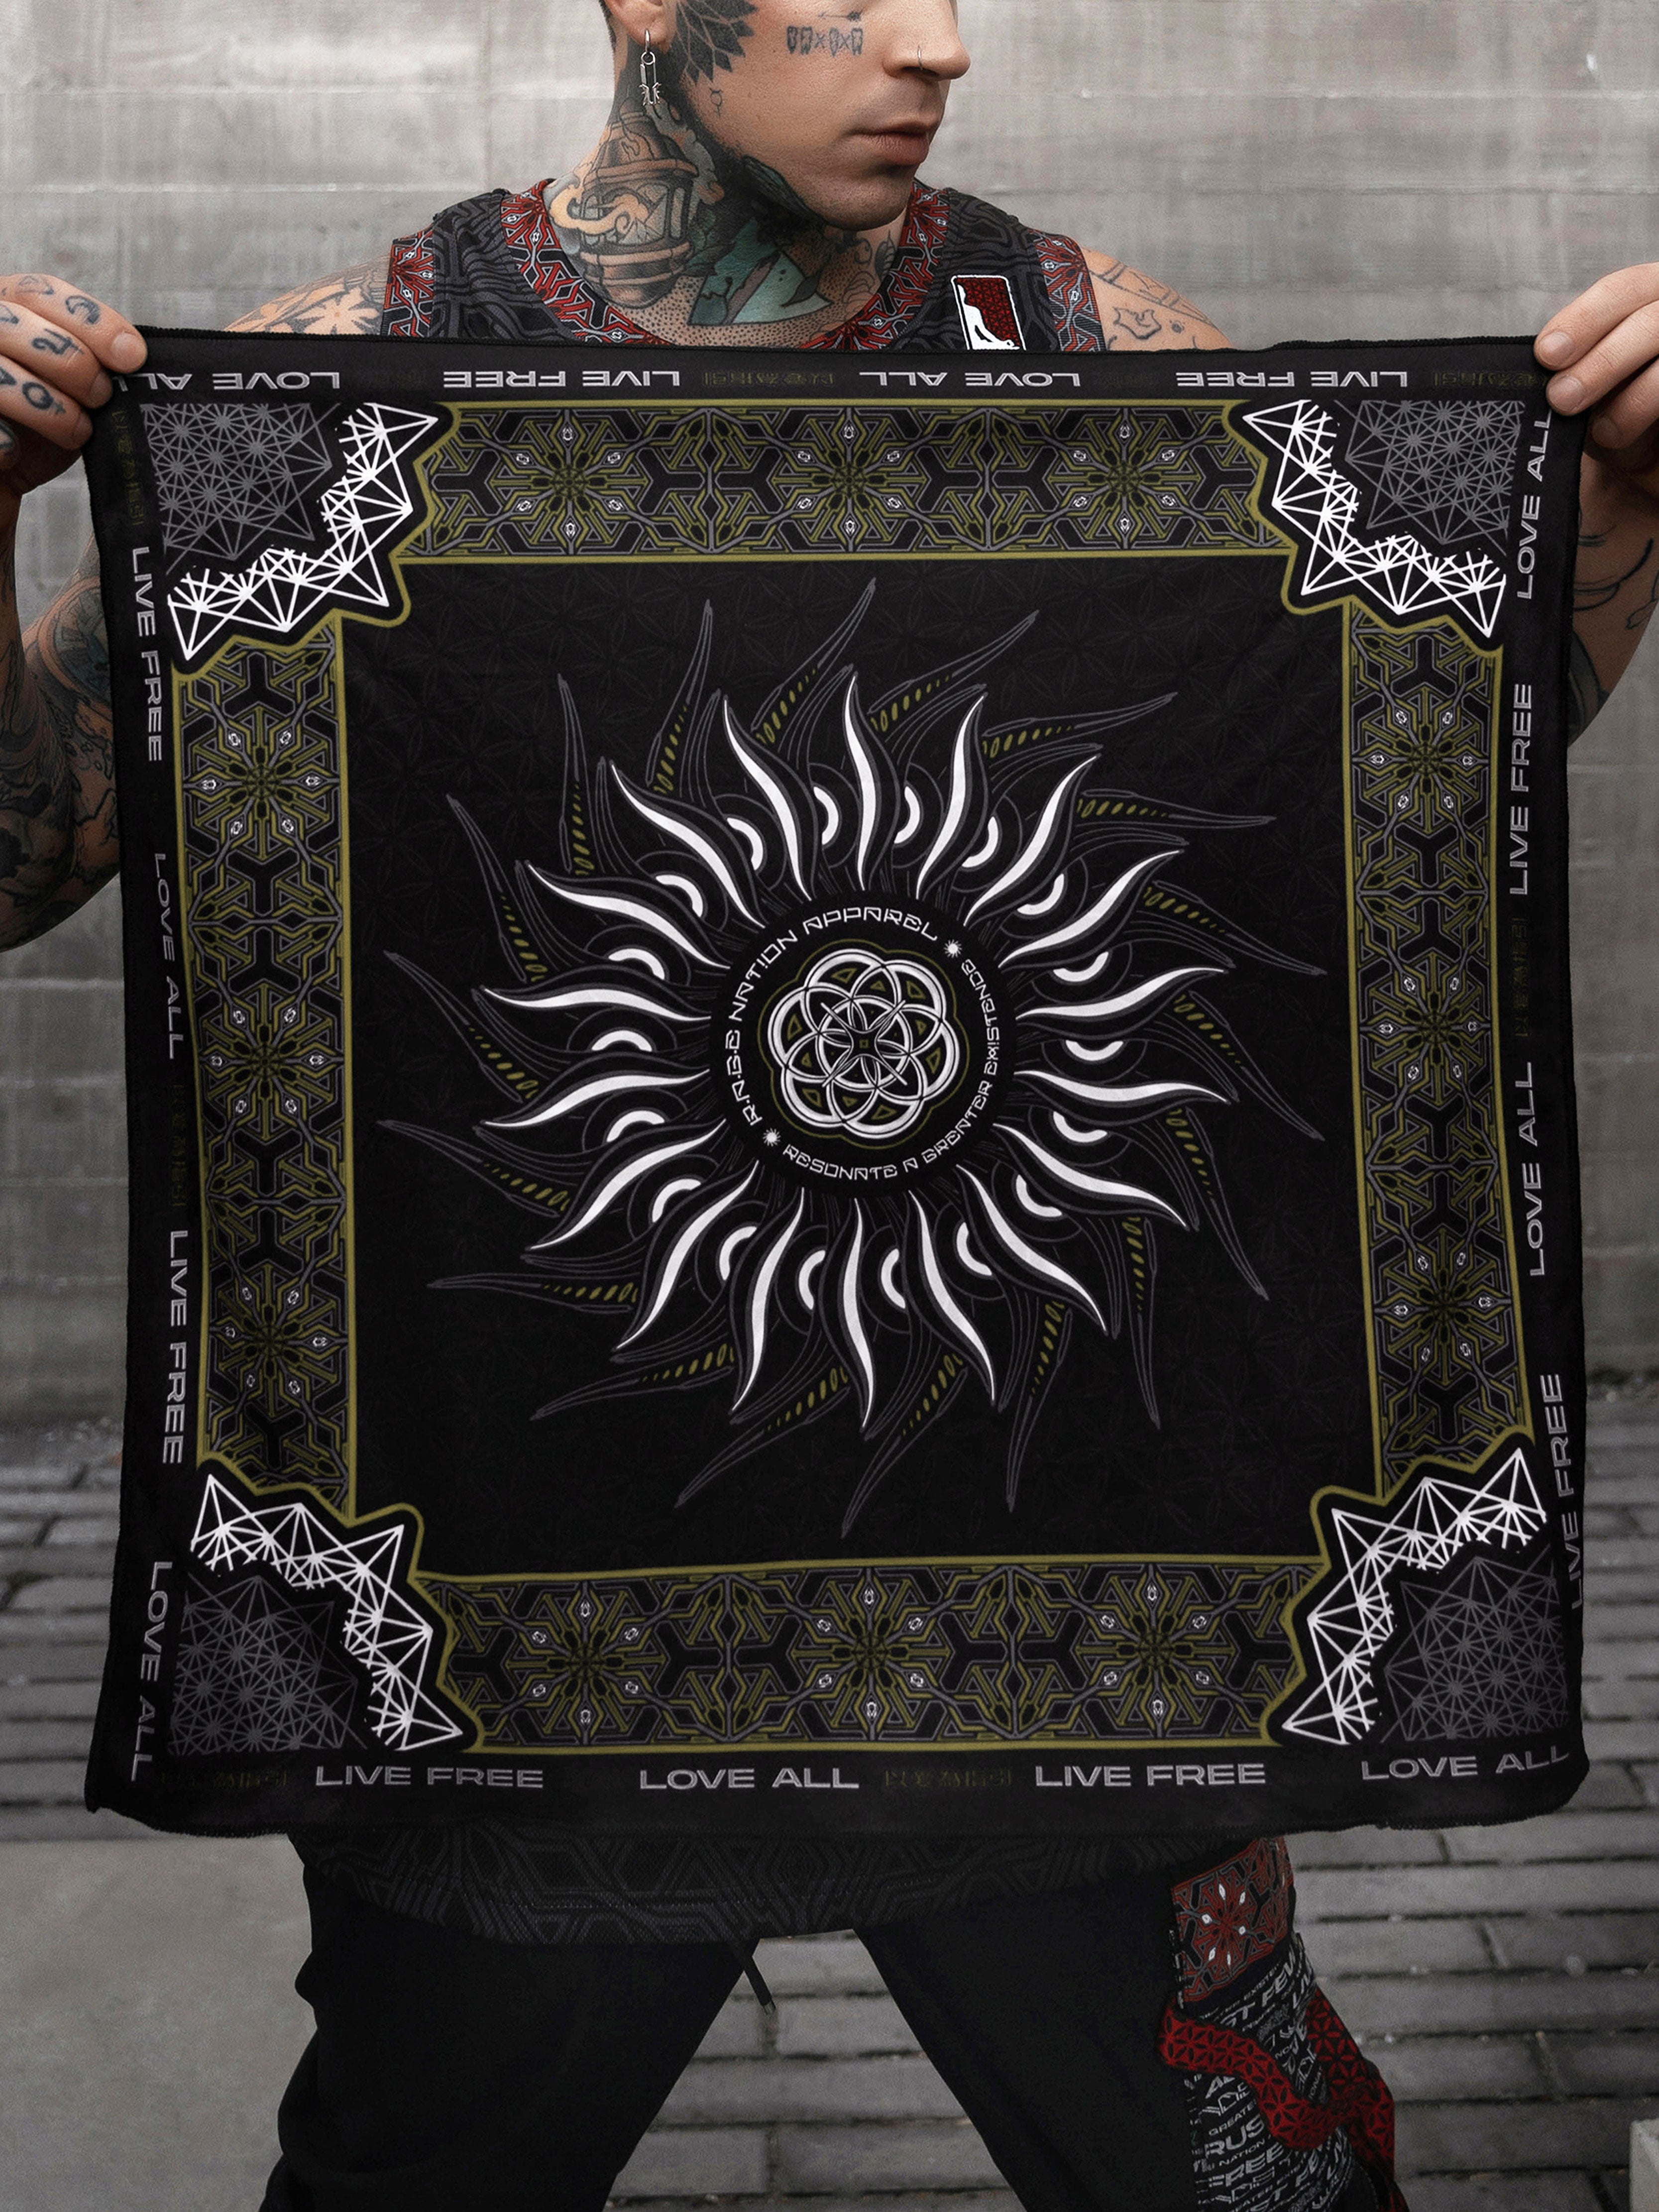 PRE-ORDER ✦ PROTECTED BY INTENT ✦ Gold Double-sided Bandana Coming Soon 